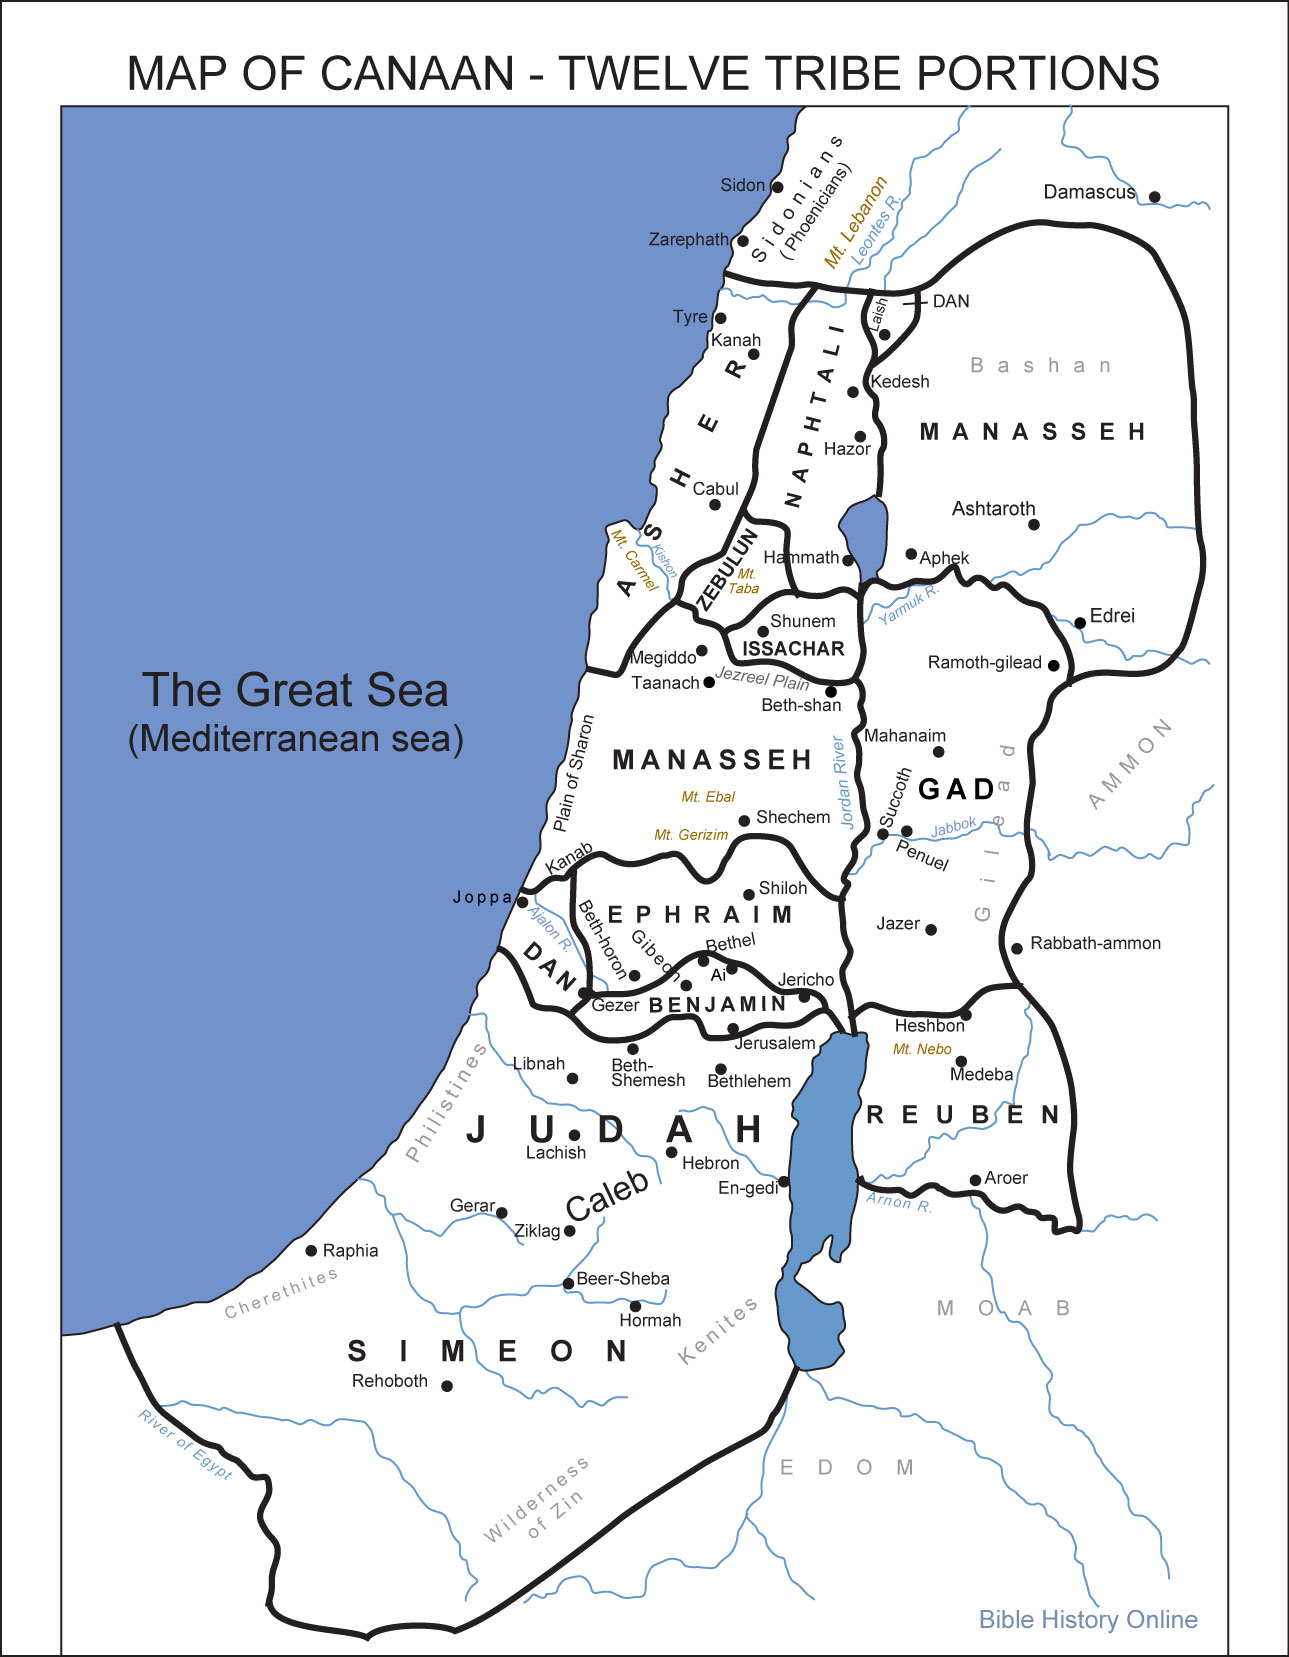 The Allotted Land of Canaan; with suggested dwellings of the Twelve Tribes of Israel's portions